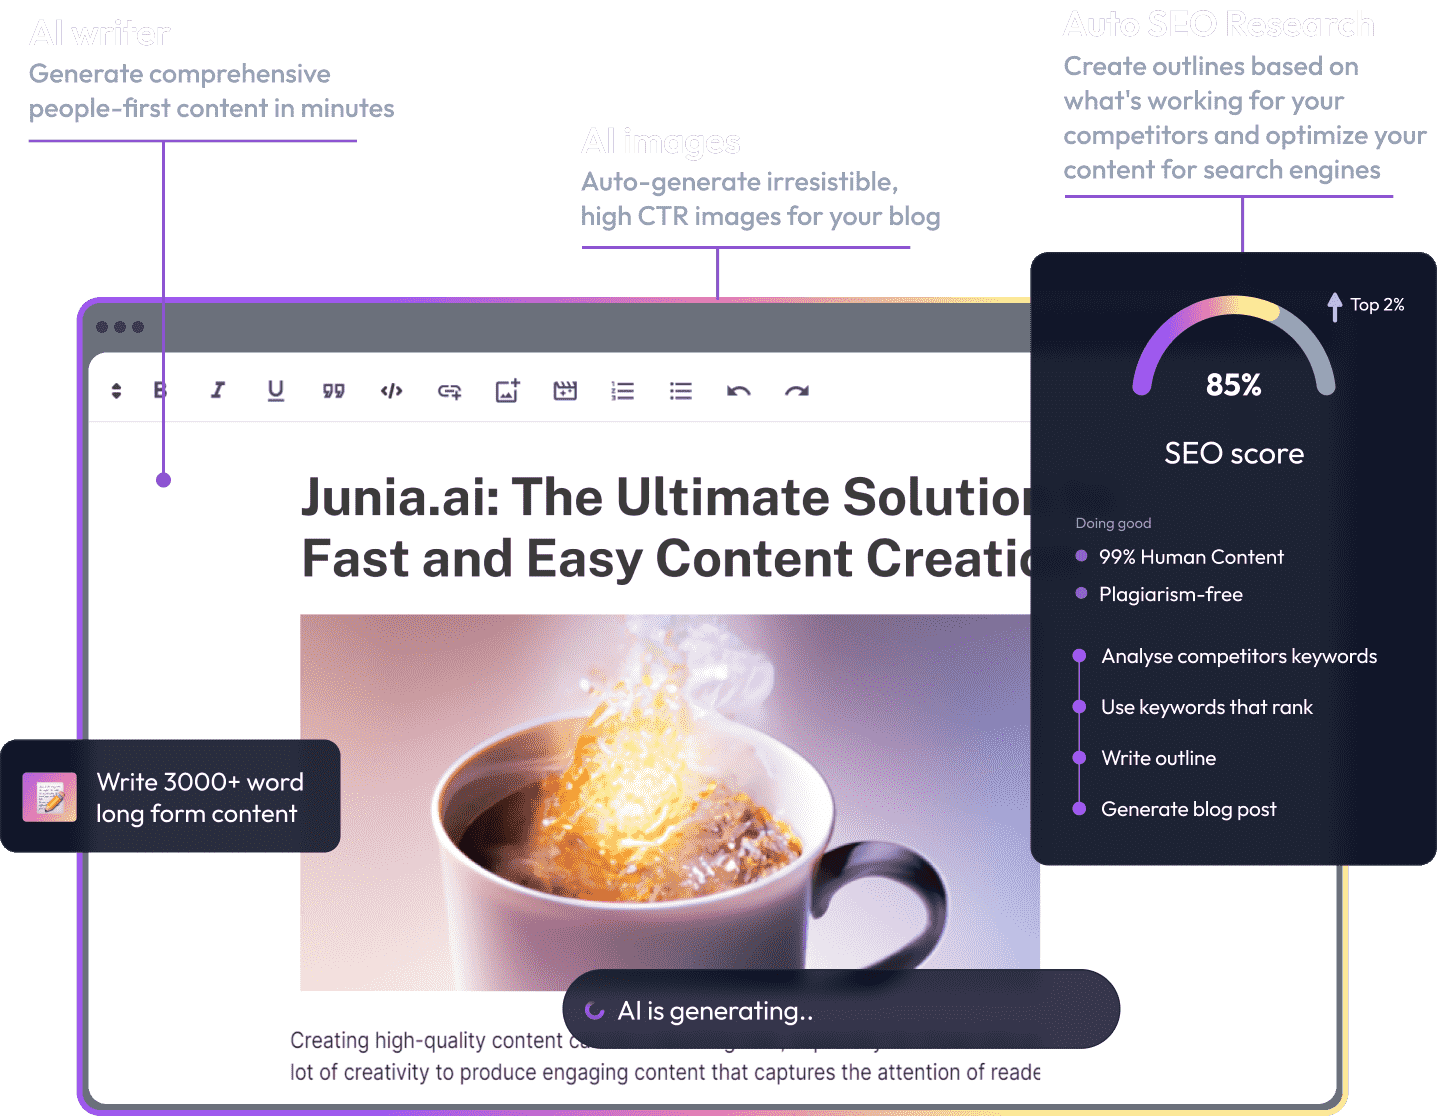 Screenshot of an AI content creation tool interface featuring AI writer, AI images, and Auto SEO Research. The UI showcases features such as generating comprehensive people-first content quickly, crafting compelling, high click-through rate images for blogs and optimizing content for search engines with an 85% SEO score gauge. It showcases a vibrant graphic of a cup with a dynamic, glowing content-creation effect. Key attributes include a top 2% SEO score indicator, assurances of 99% human-like and plagiarism-free content, functionalities for keyword analysis, and tools for creating outlines and writing long-form content based on competitive ranking keywords.